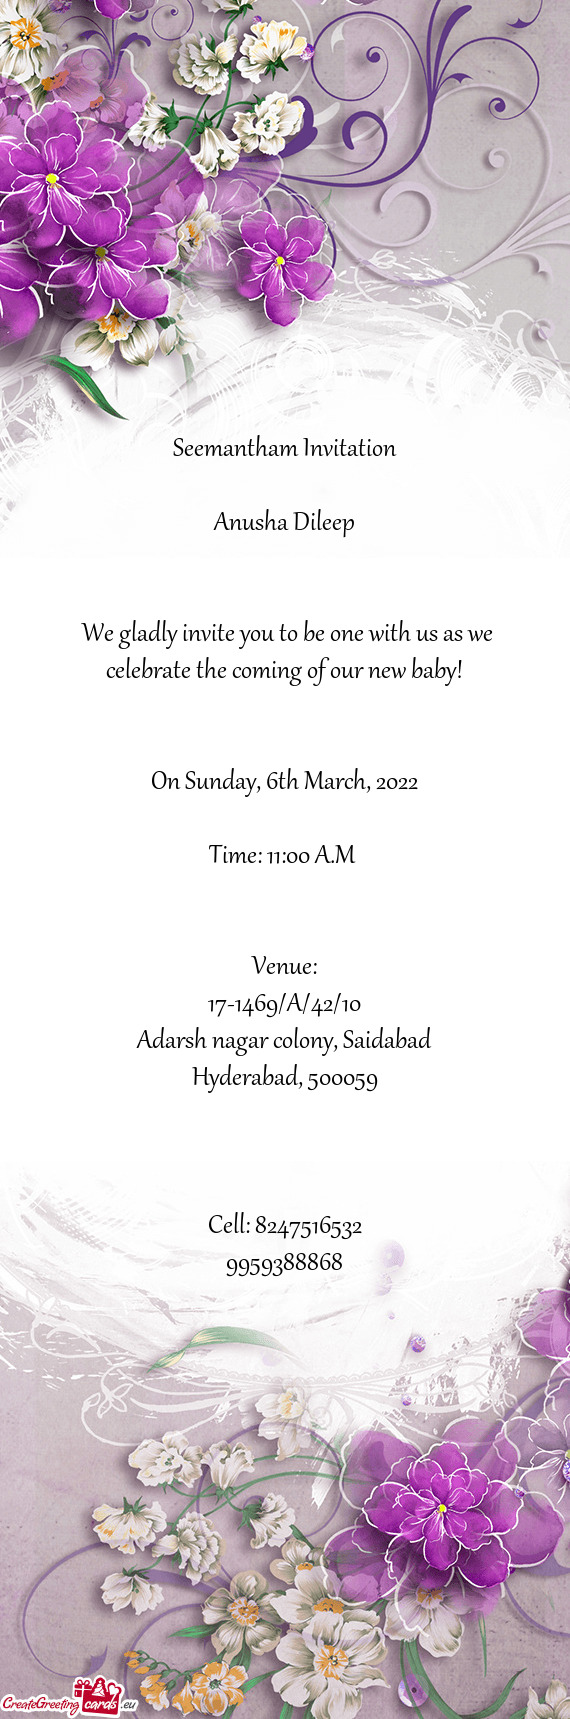 Seemantham Invitation
 
 Anusha Dileep
 
 
 We gladly invite you to be one with us as we celebrate